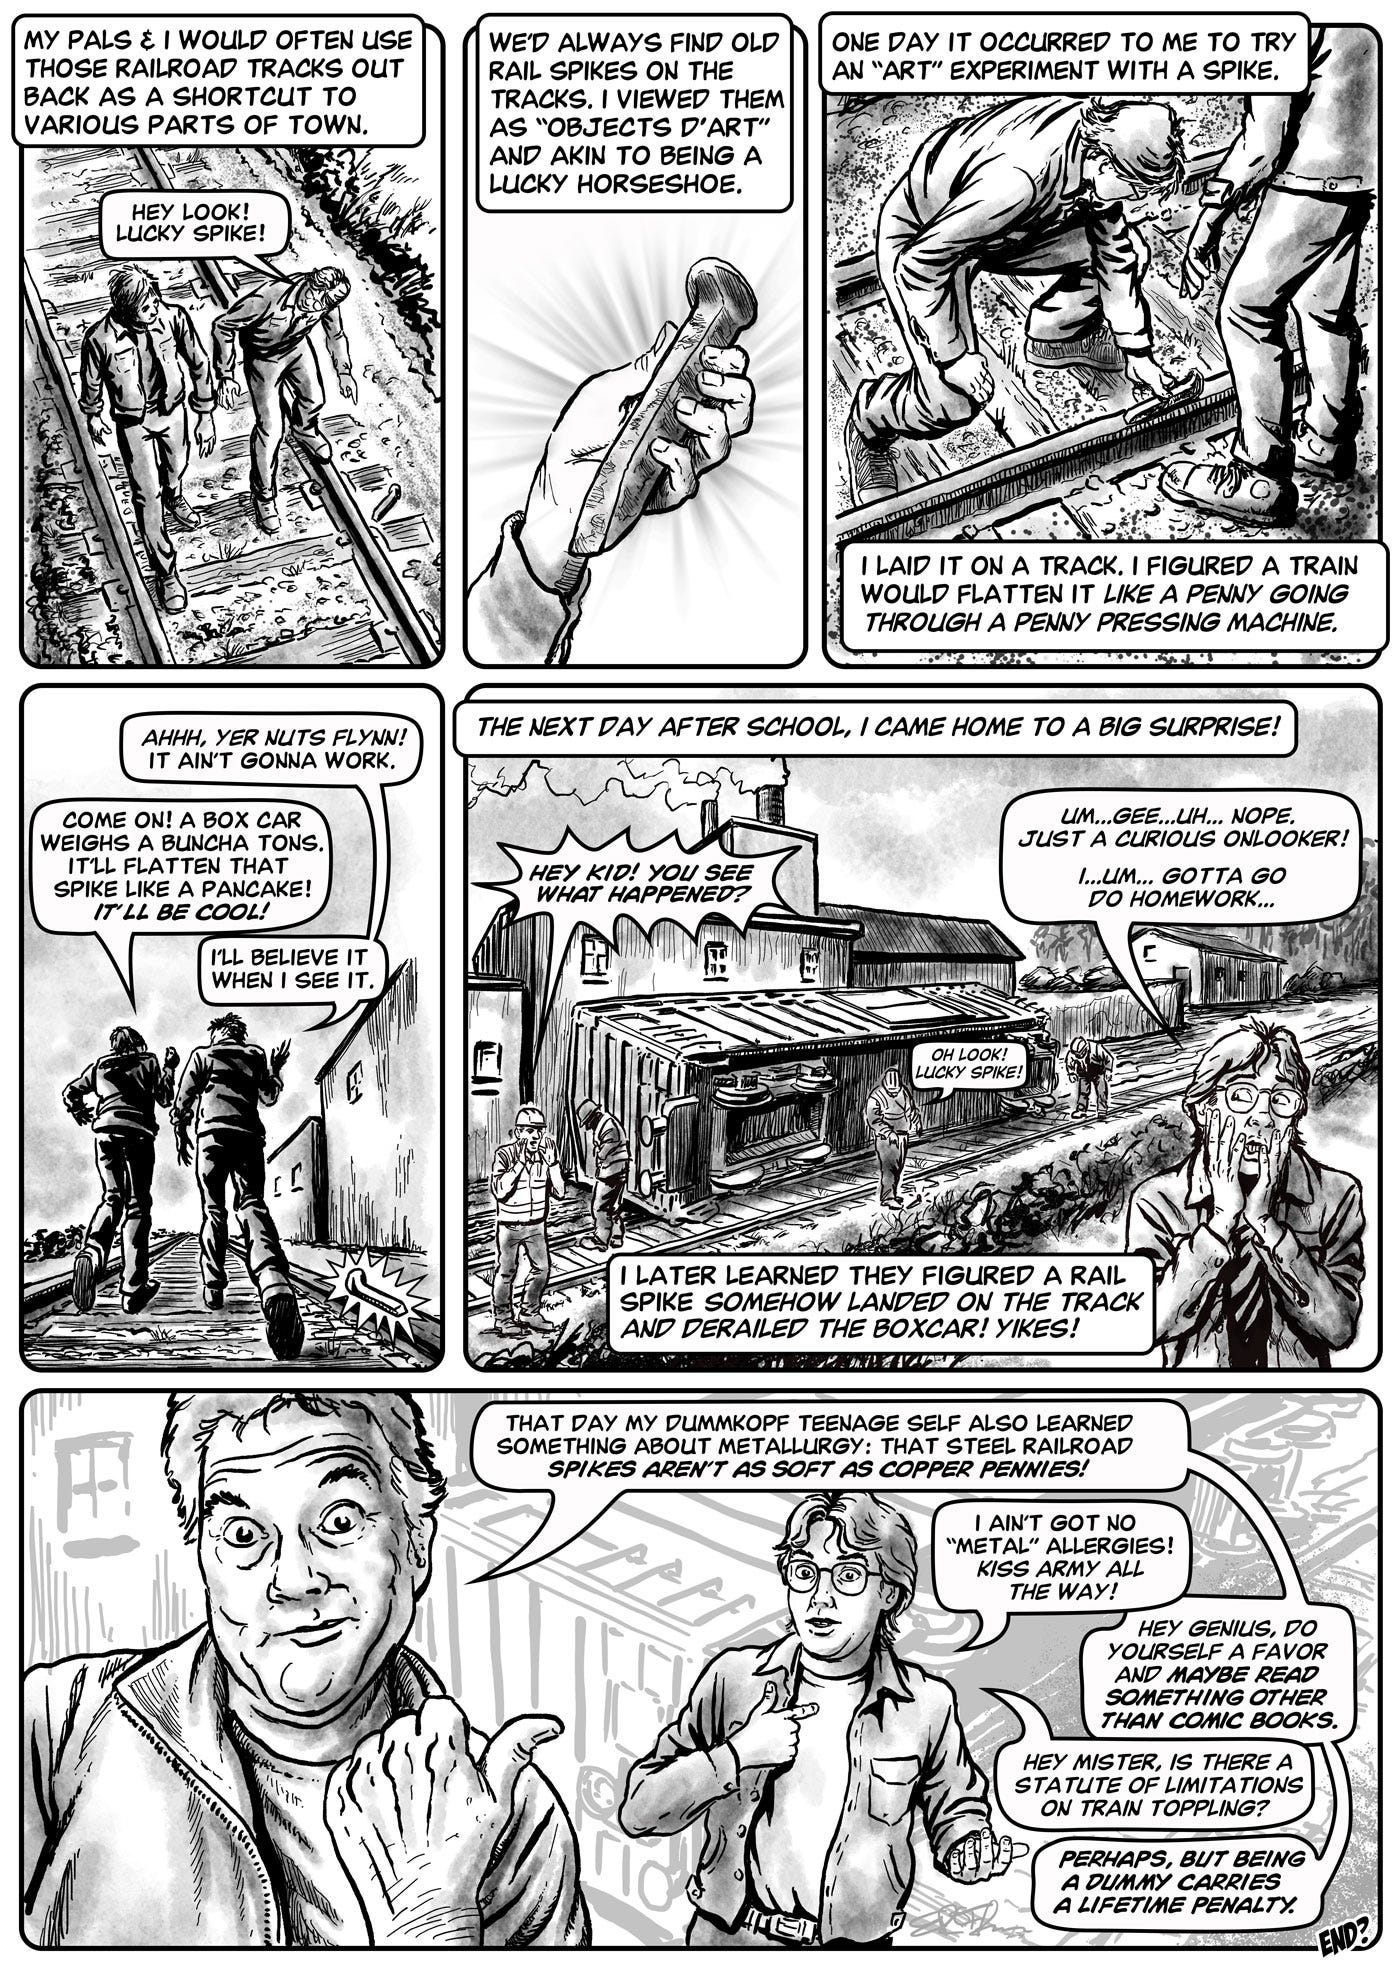 Metallurgy for Dummies page 3 comic by E.R. Flynn